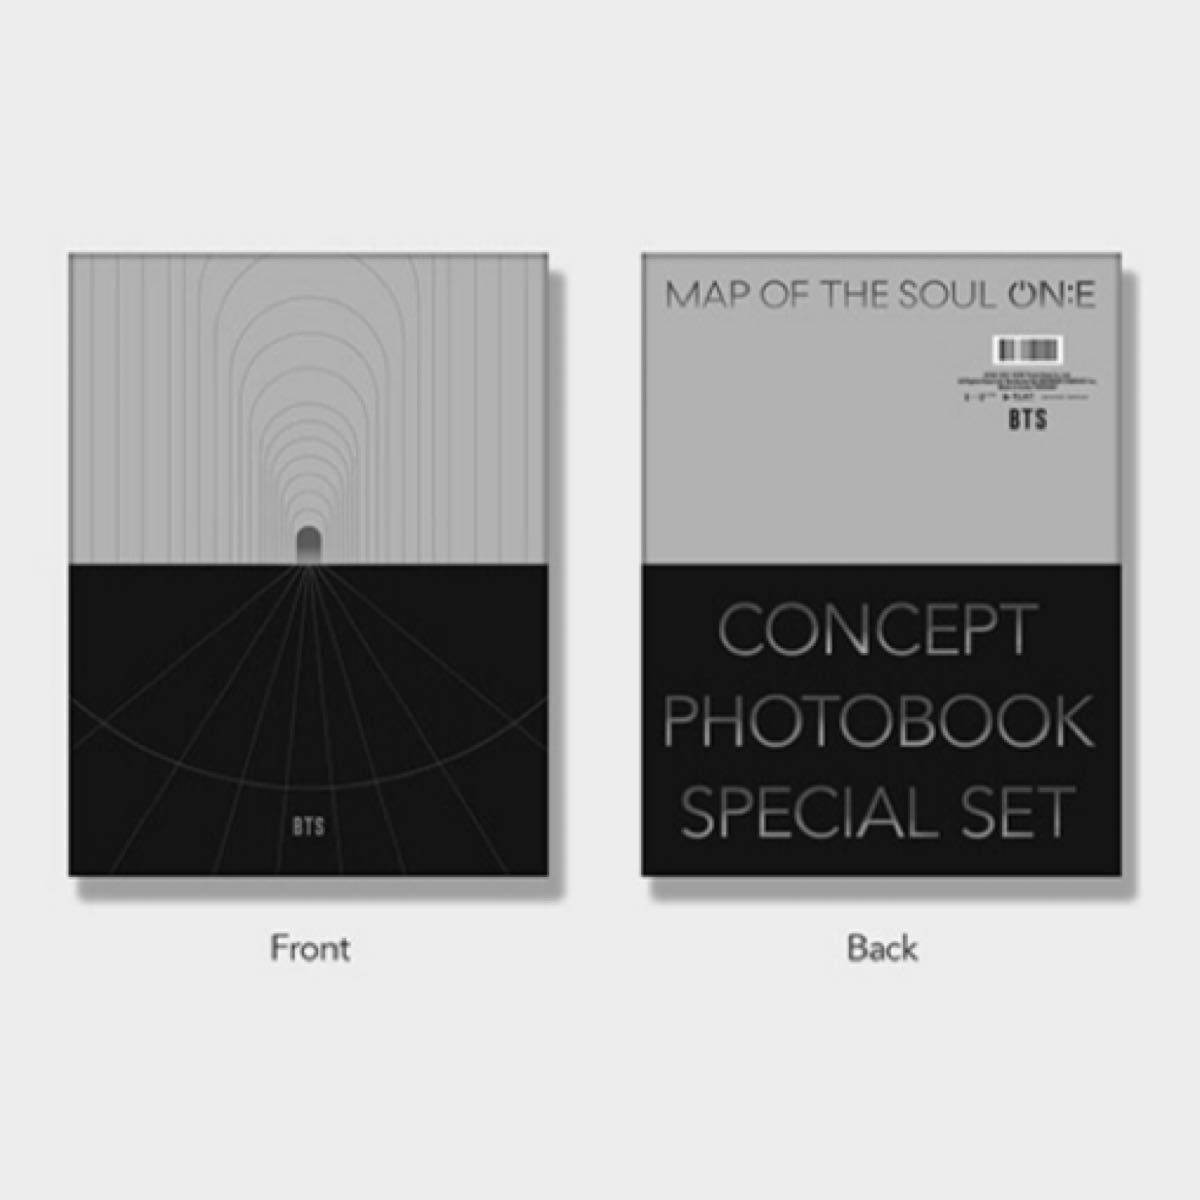 BTS MOS ON E CONCEPT PHOTOBOOK SPECIAL SET コンセプト フォトブック